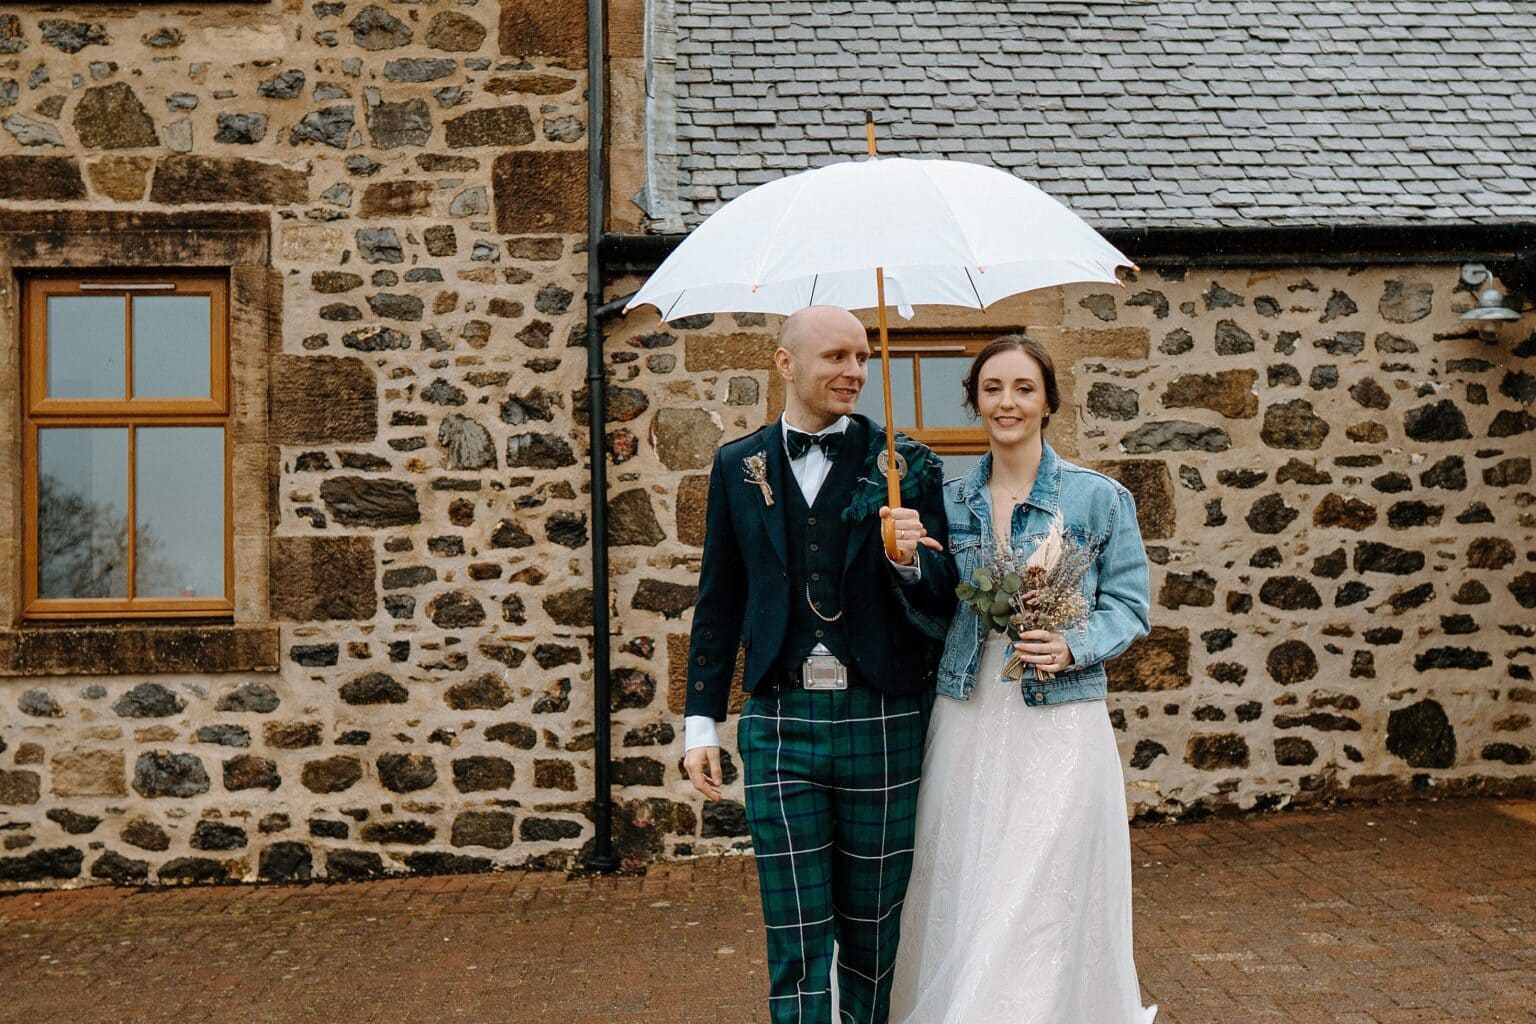 the bride is wearing a blue denim jacket and holding her dried flower bouquet as she and the groom stand underneath a white umbrella in front of a stone walled barn at their farm wedding venues scotland